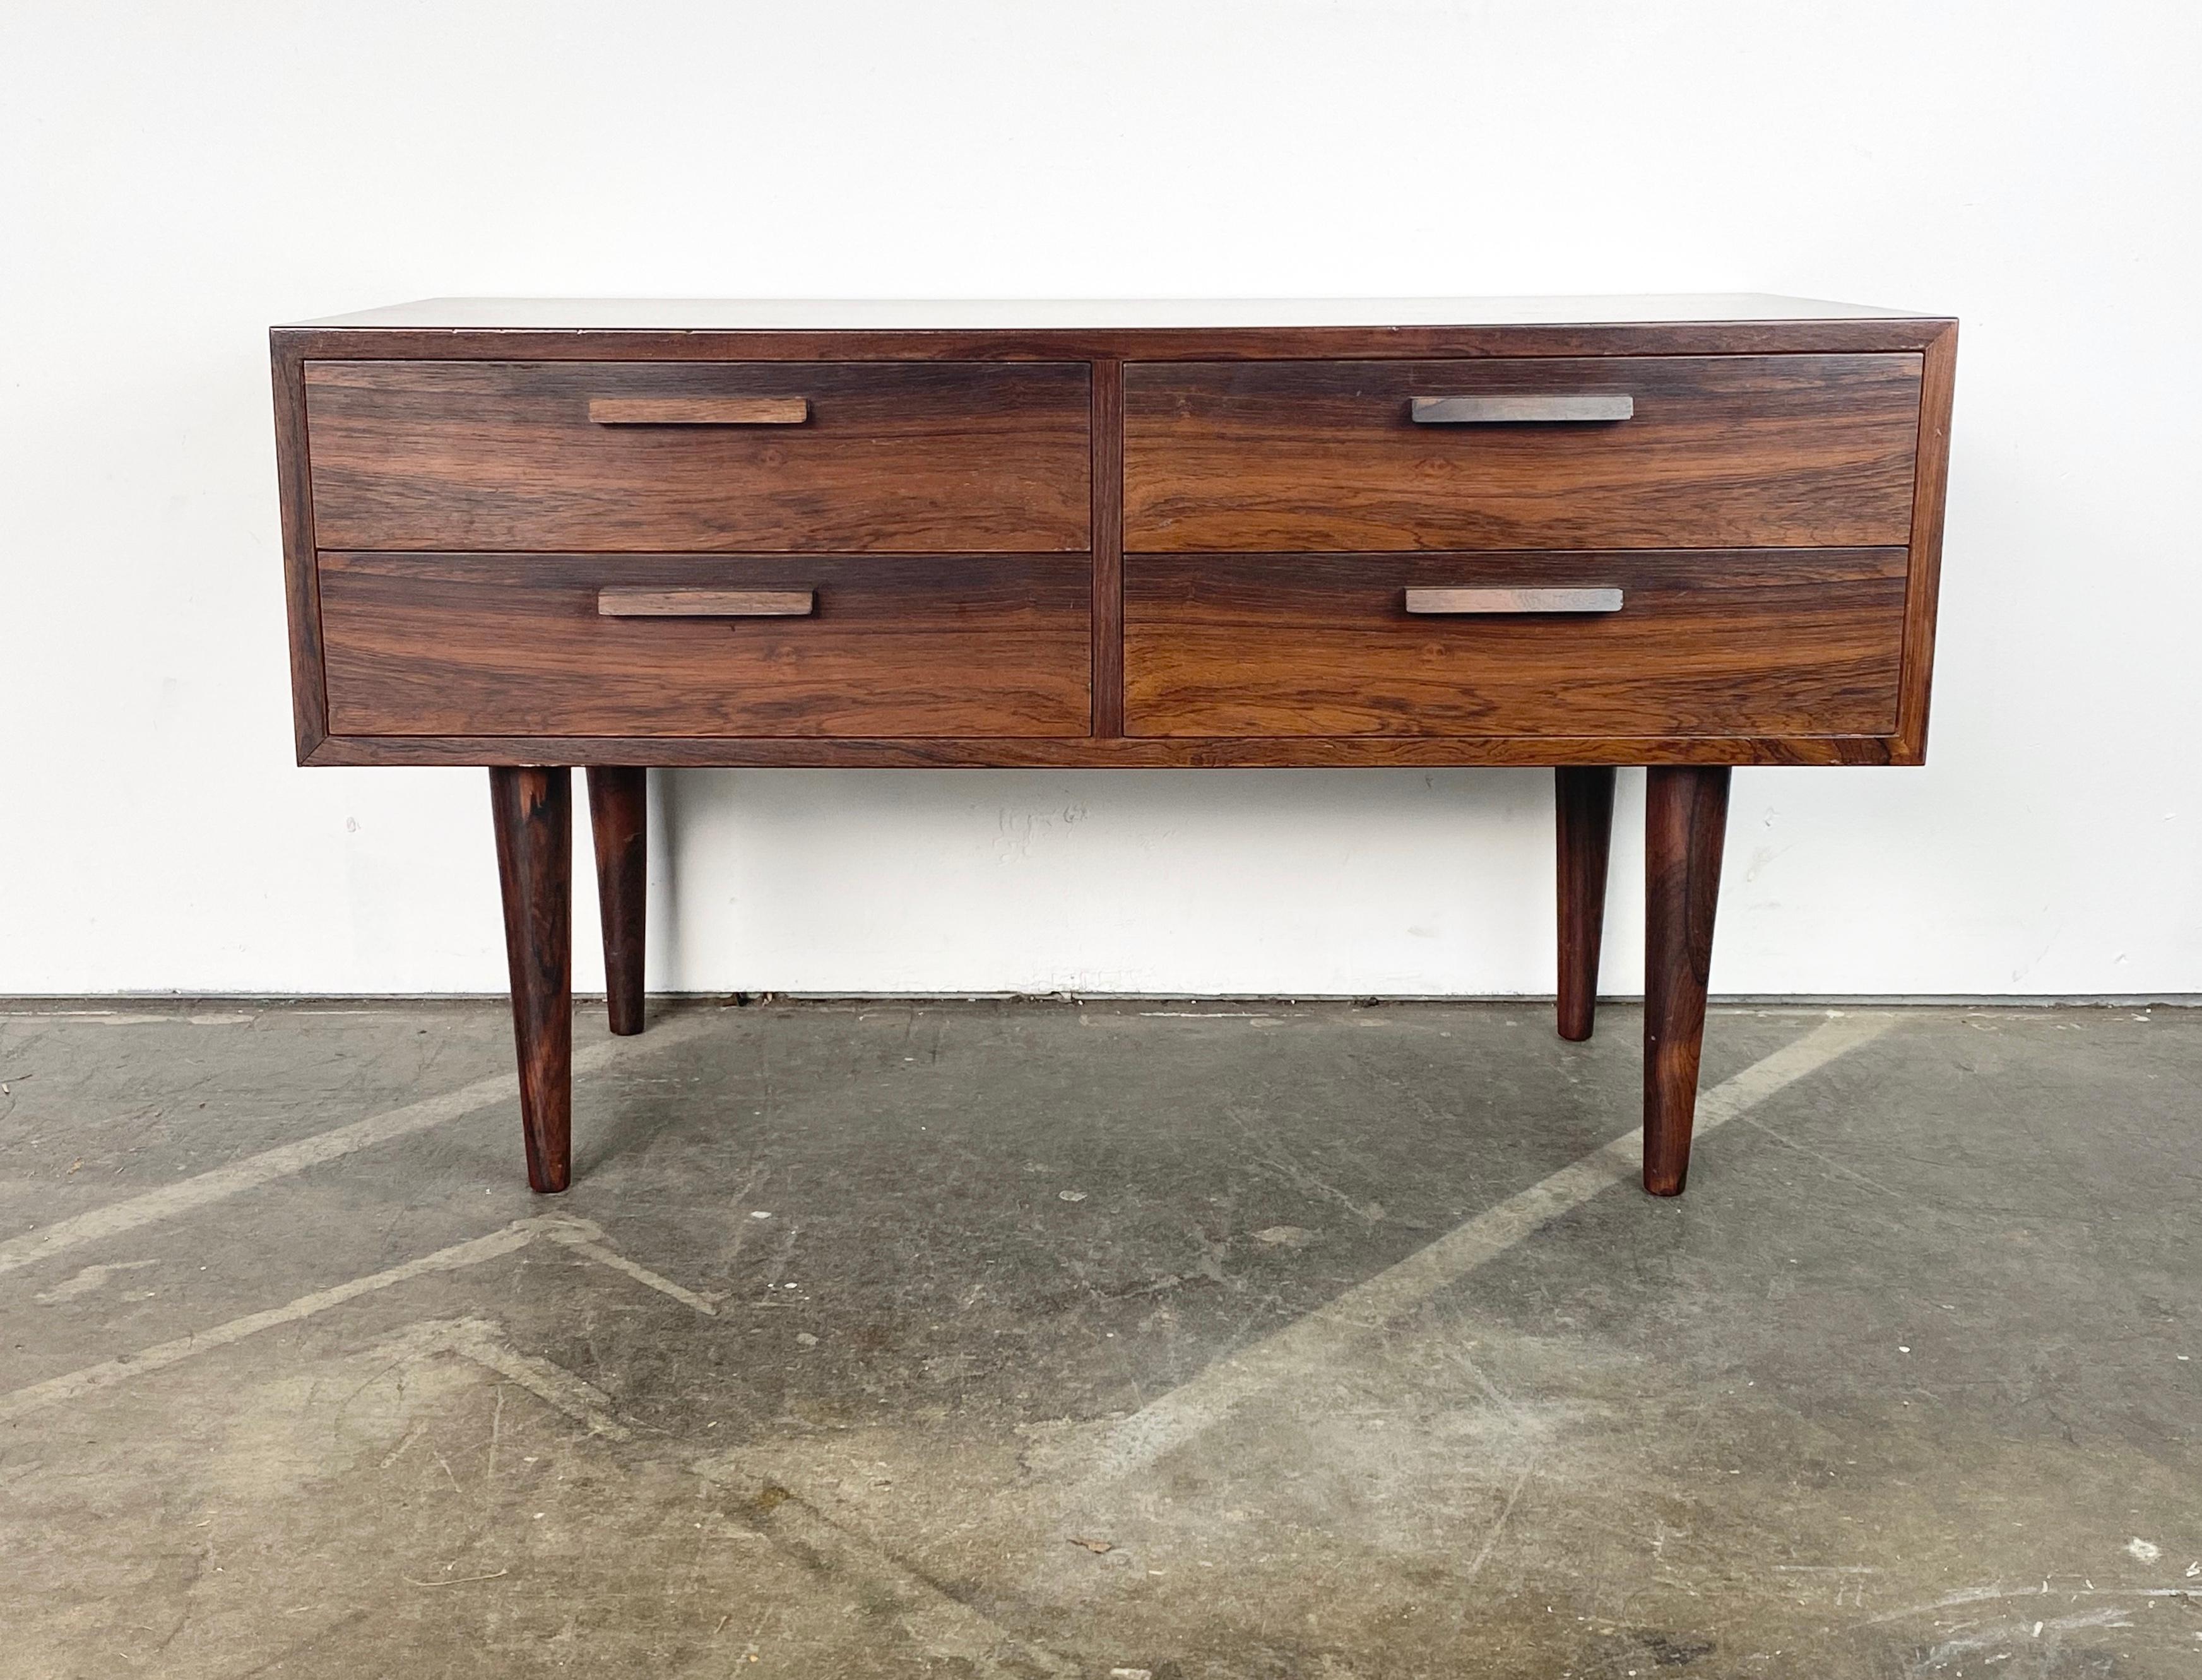 Stunning small dresser by Kai Kristiansen. Finished in luxurious Brazil rossewood with exceptional grain detail and contrast. Dovetailed drawers open smoothly. Legs in great shape. Overall a fabulous piece exhibiting only minimal wear commensurate